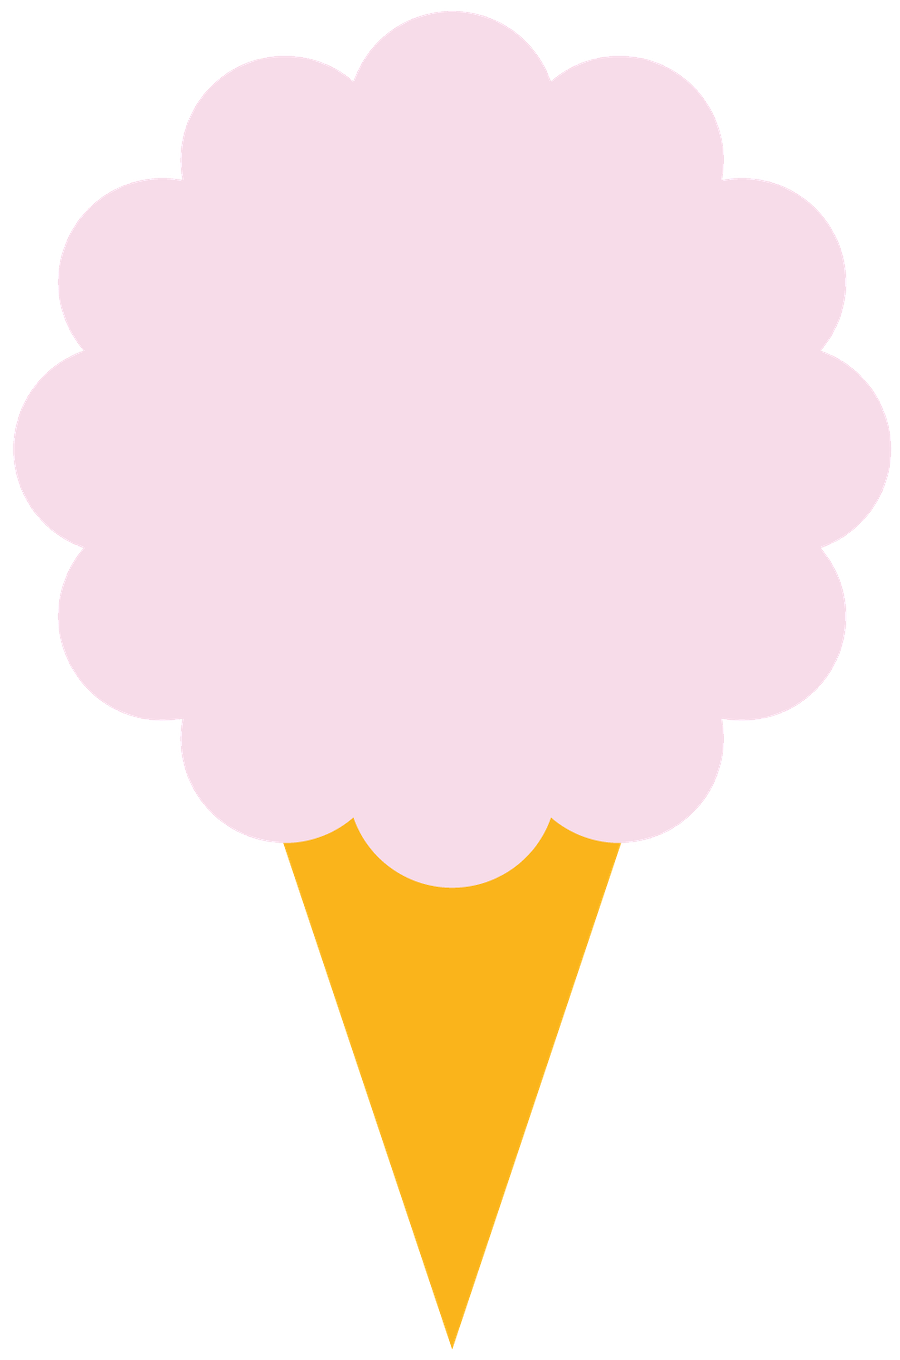 cloud clipart candy